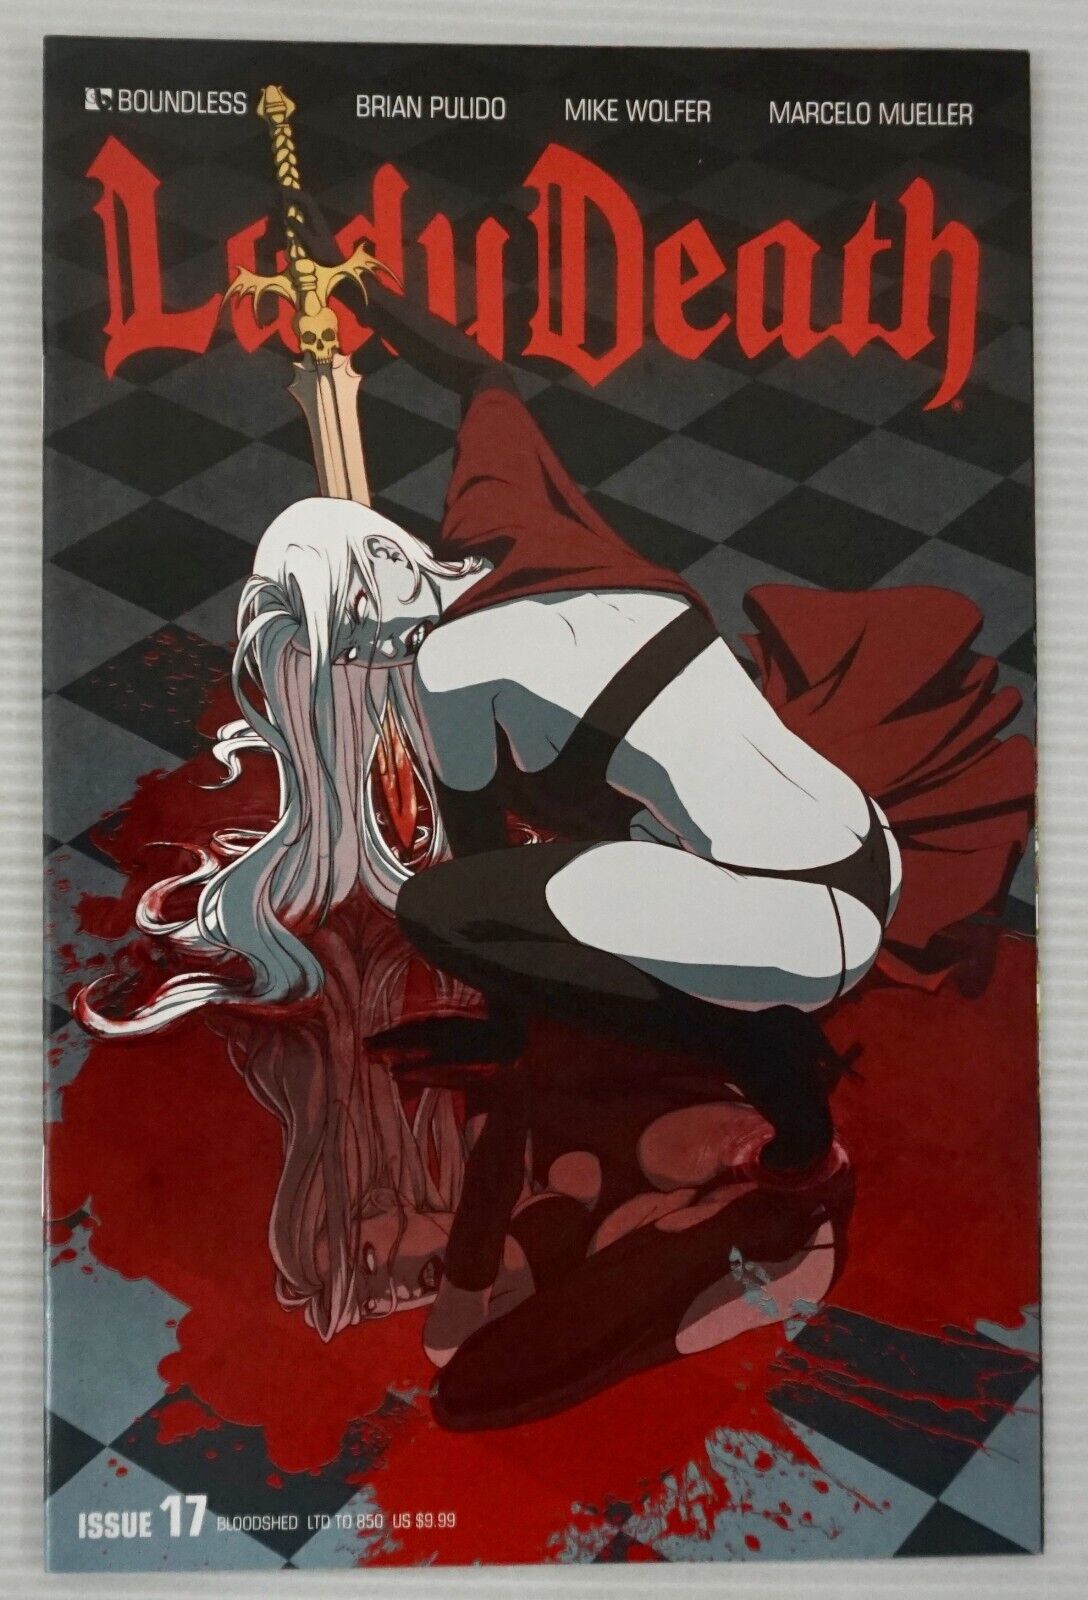 LADY DEATH BOUNDLESS #17 2012 BLOODSHED VARIANT Brian Pulido LTD to 850 NM